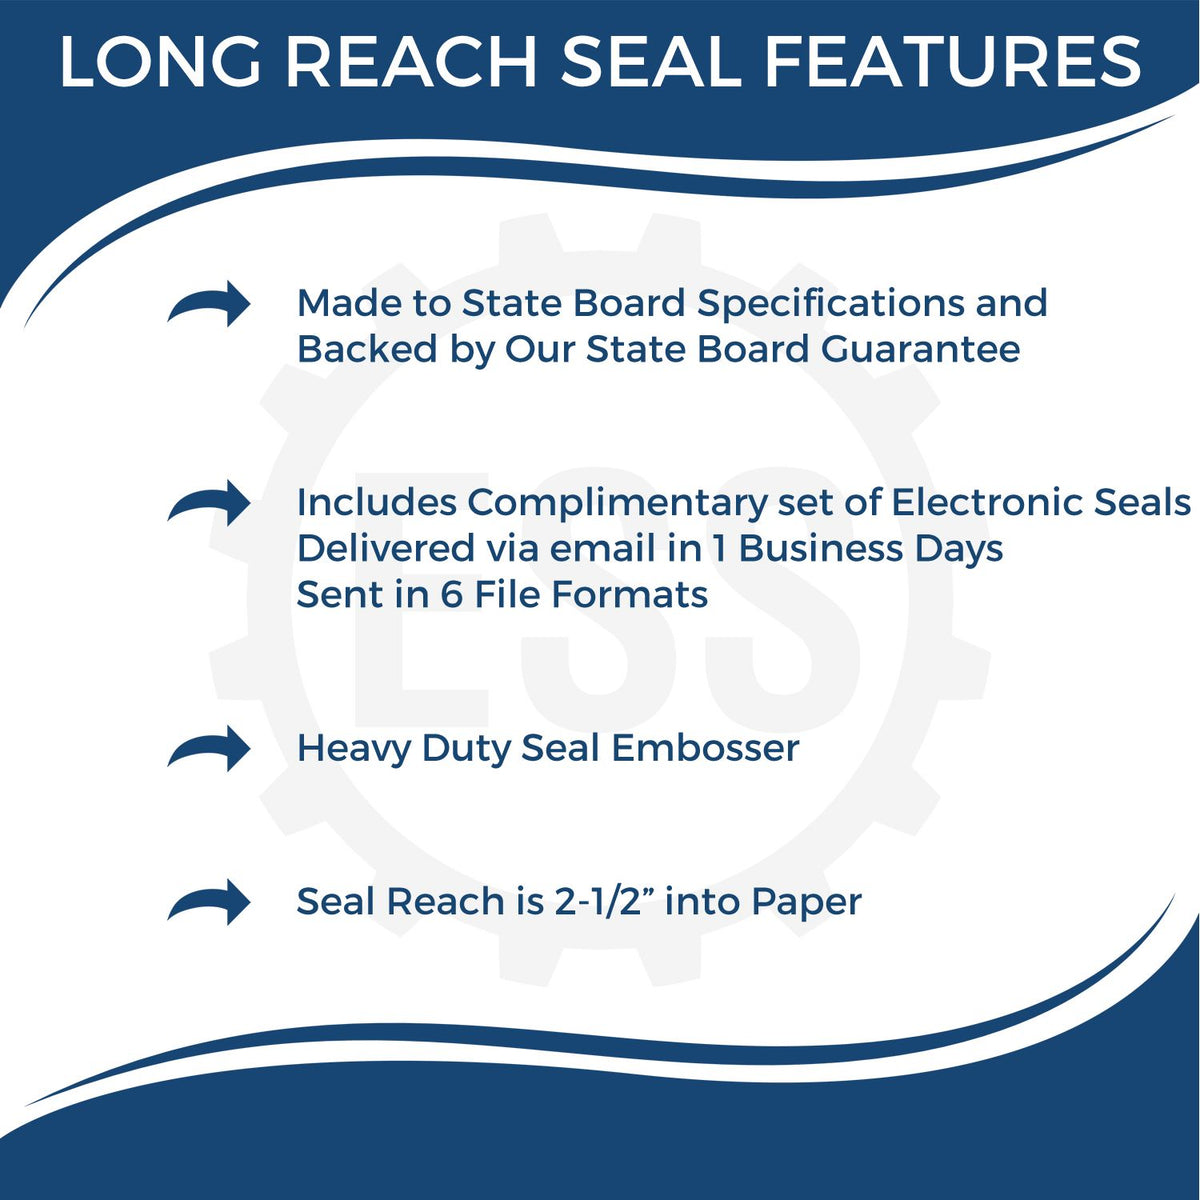 A picture of an infographic highlighting the selling points for the Long Reach Nebraska Land Surveyor Seal